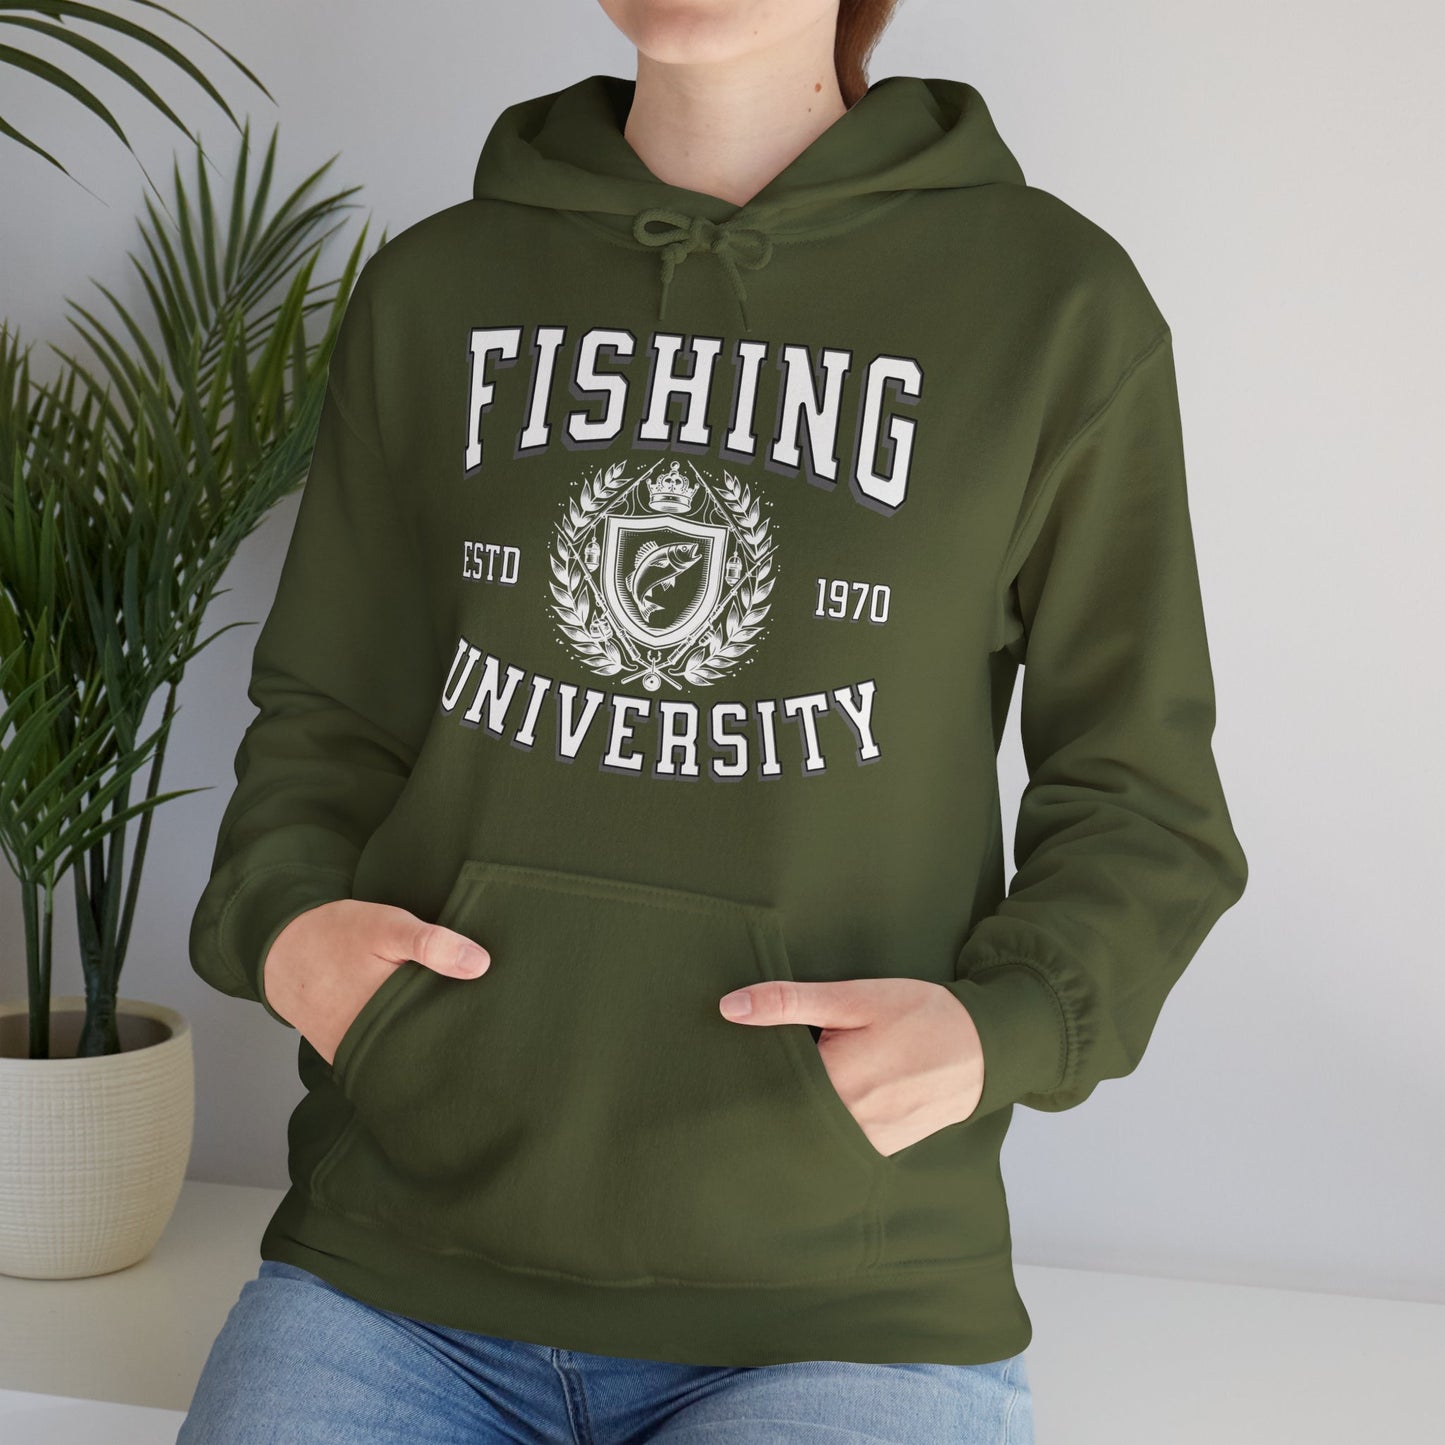 Fishing University - Cotton/Poly Blend Hoodie - 7 Colors